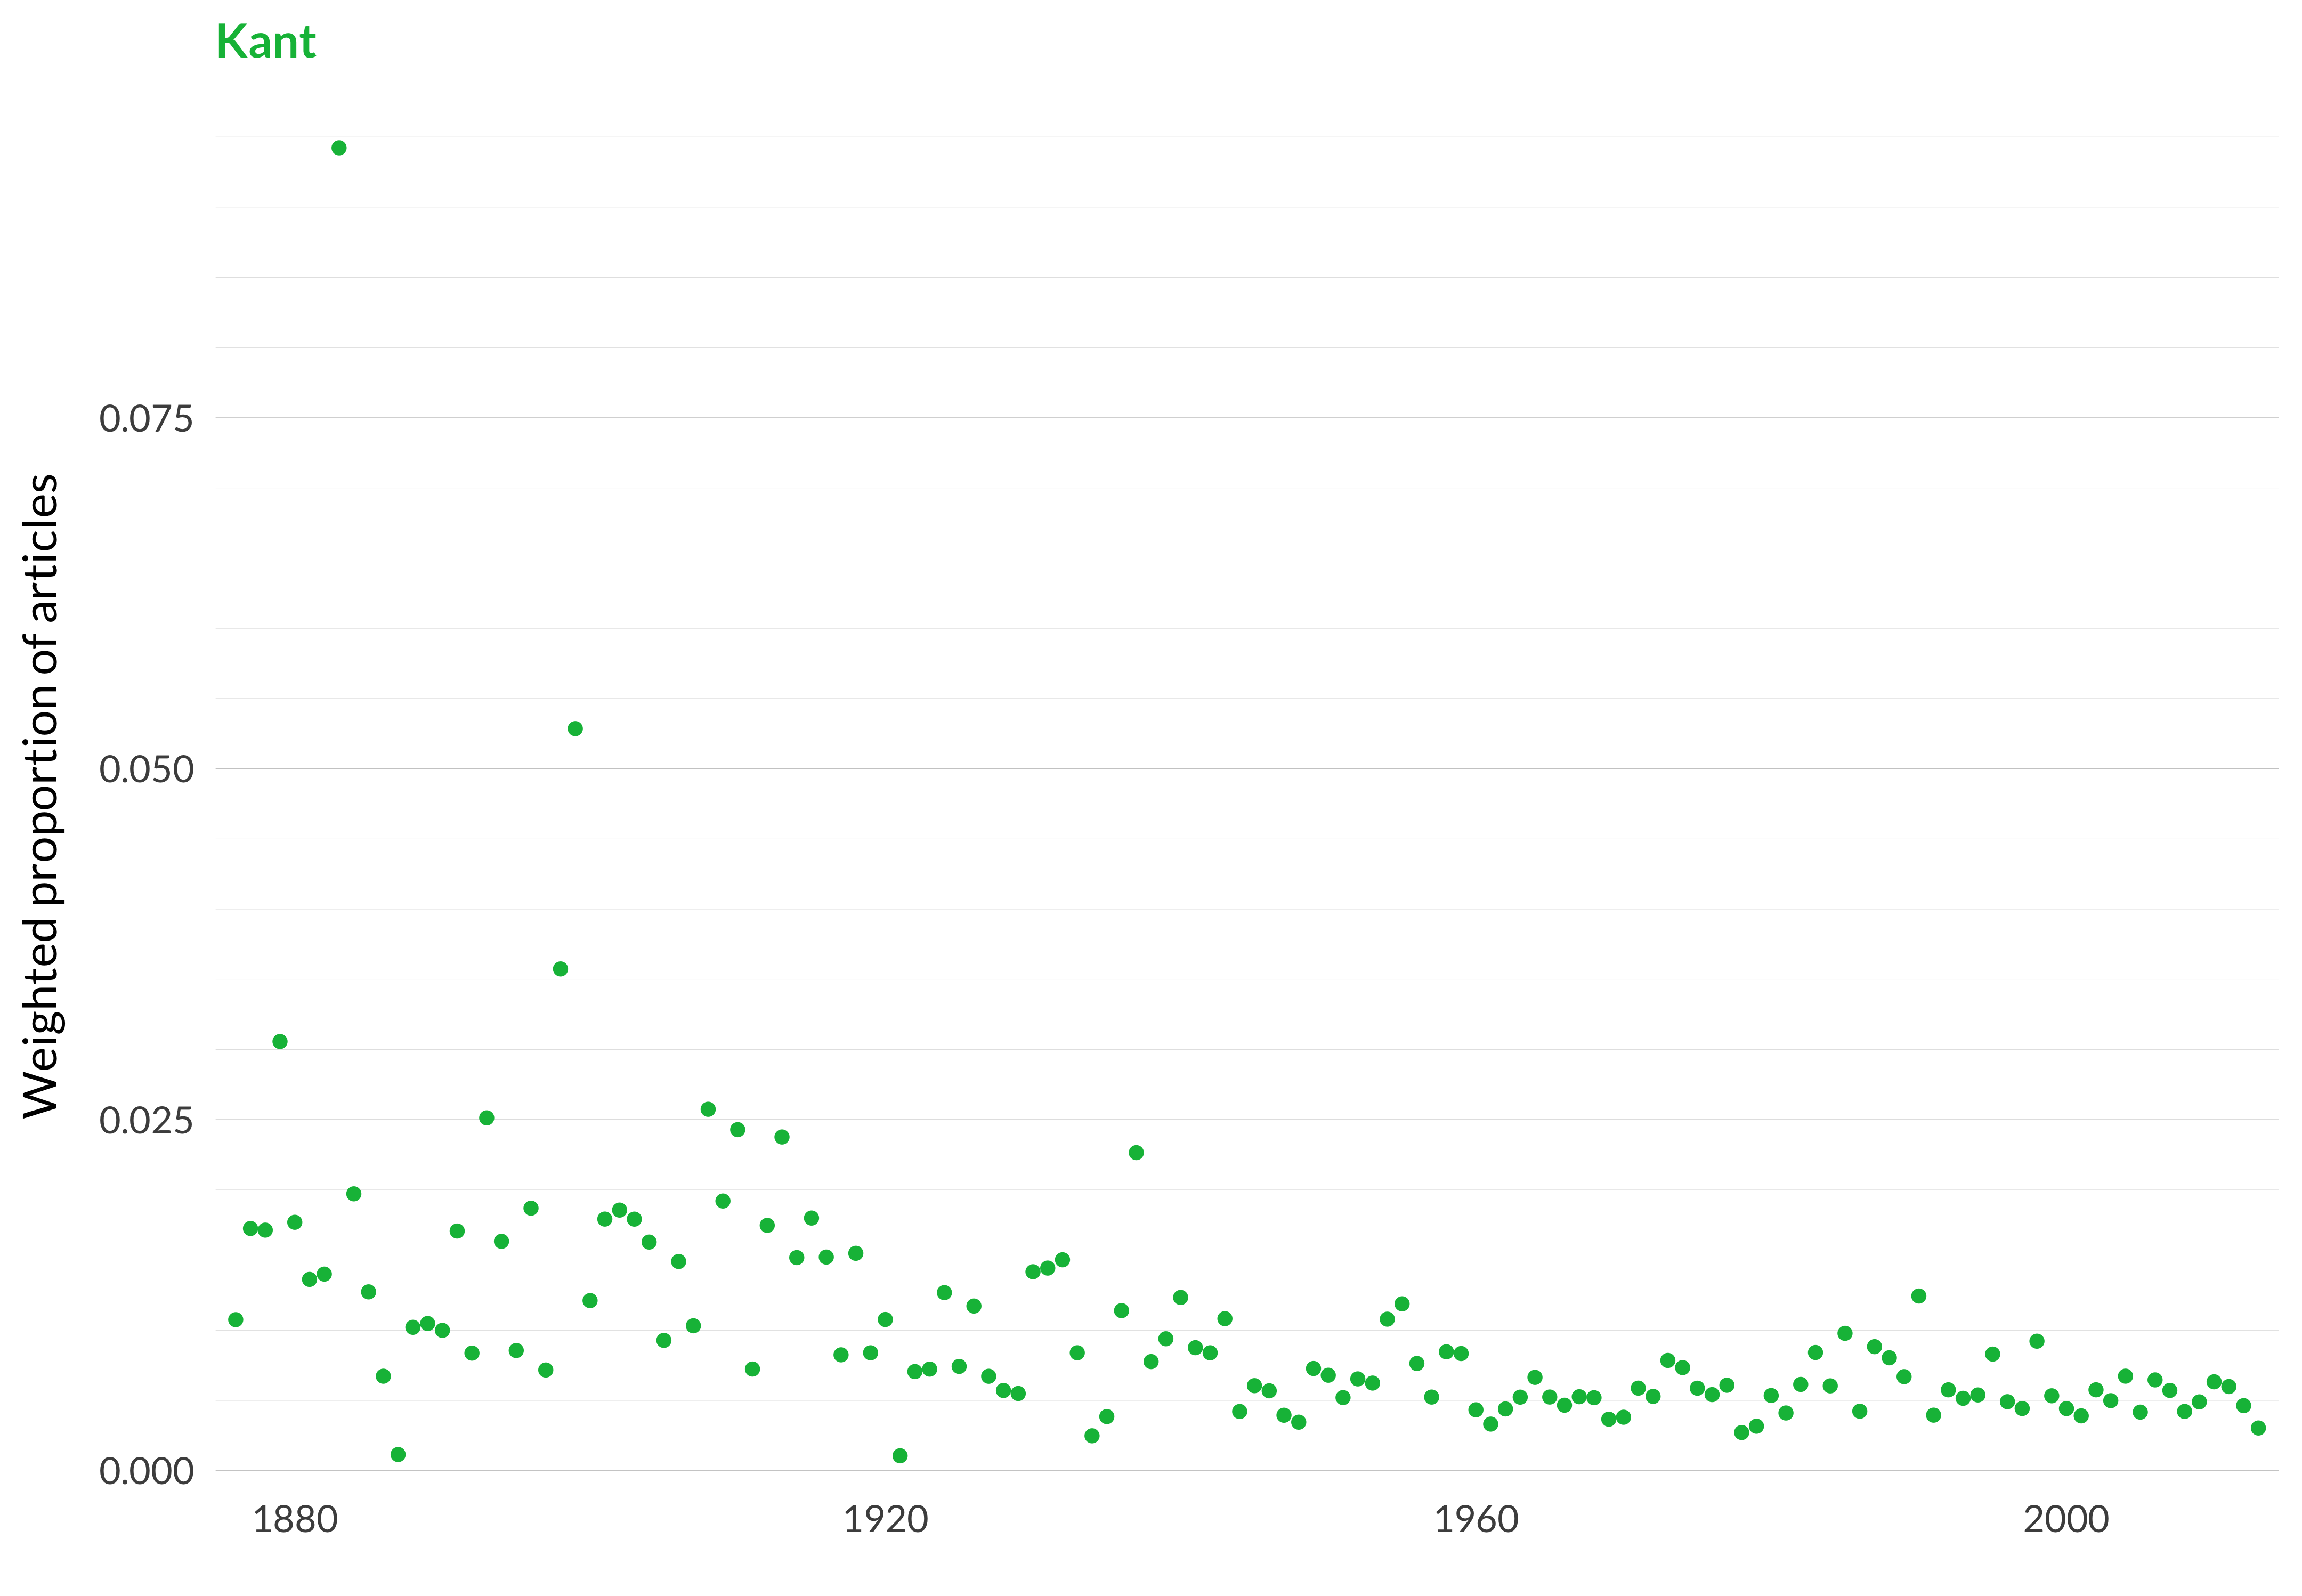 A scatterplot showing which proportion of articles each year are in the Kanttopic. The x-axis shows the year, the y-axis measures the proportion of articles each year in this topic. There is one dot per year. The highest value is in 1883 when 9.4% of articles were in this topic. The lowest value is in 1921 when 0.1% of articles were in this topic. The full table that provides the data for this graph is available in Table A.32 in Appendix A.